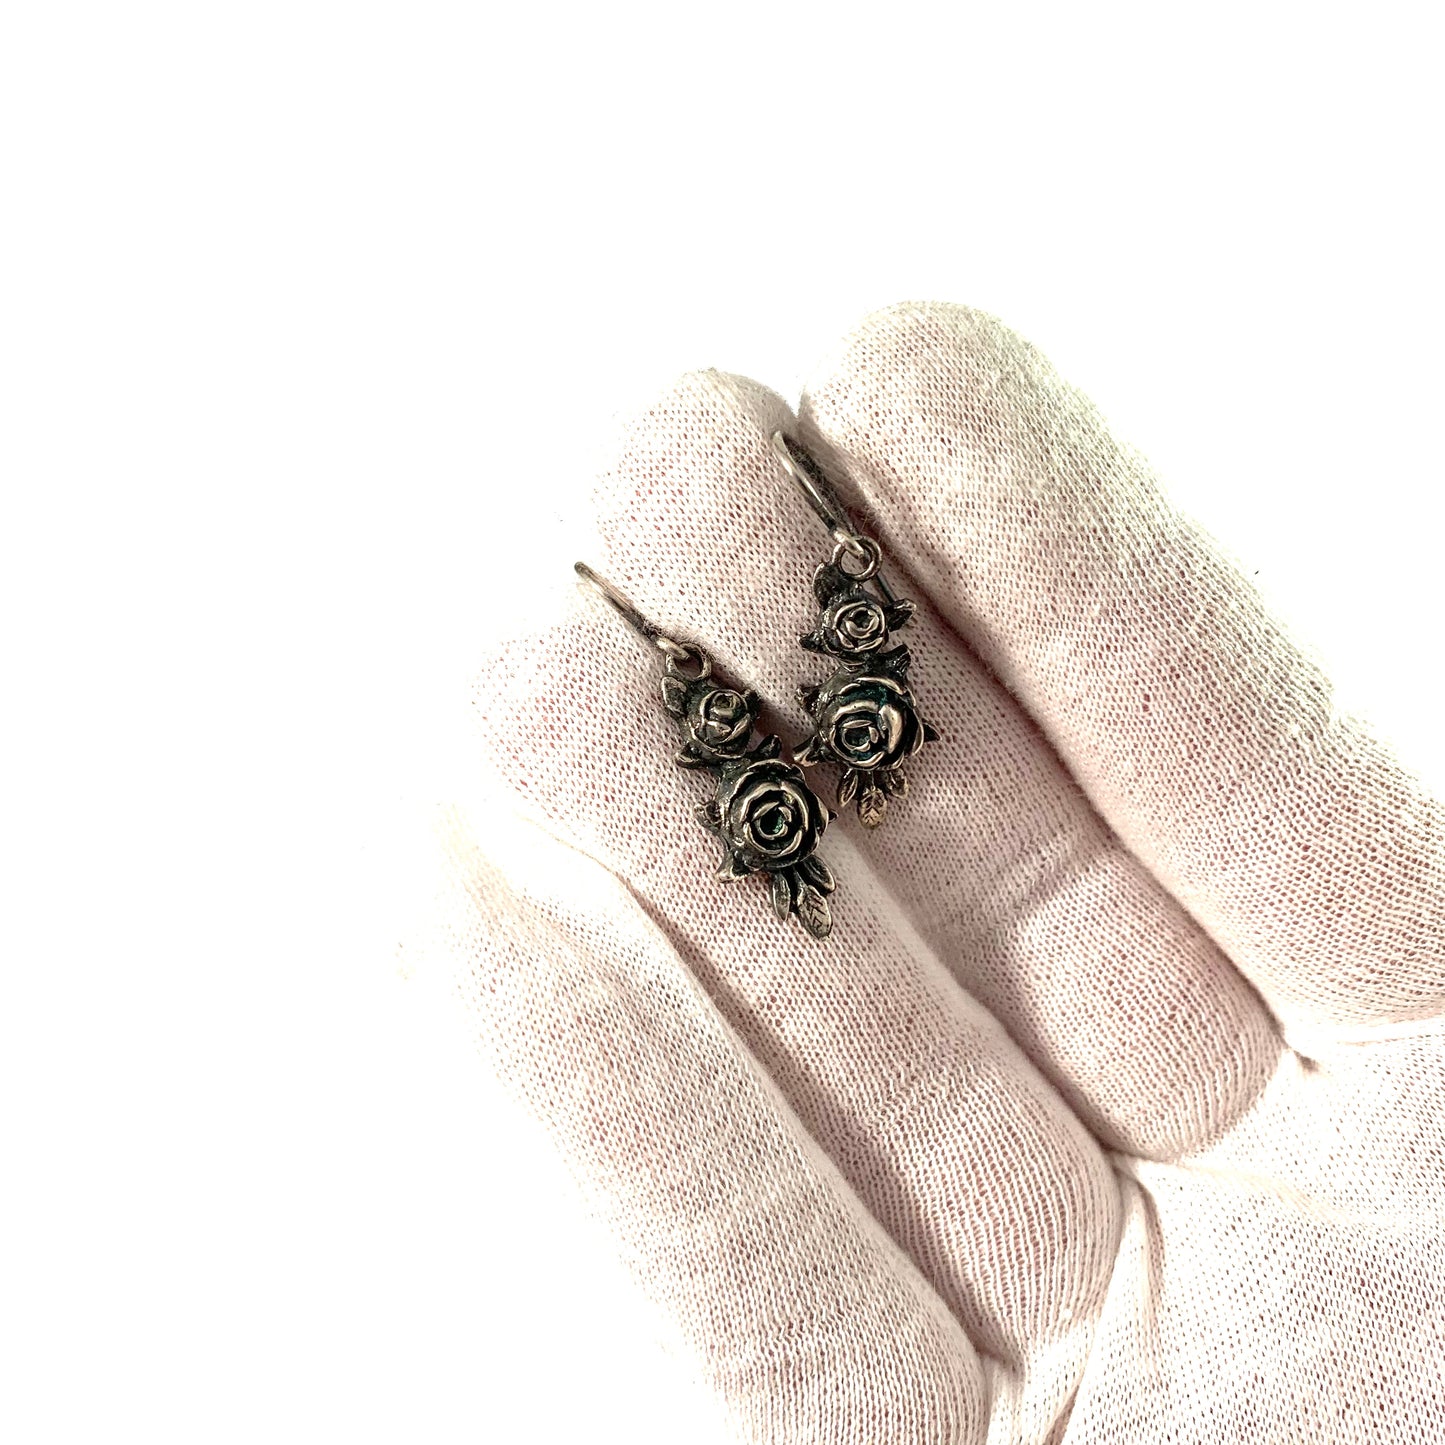 Finland, Mid Century Solid Silver Rose Flower Pair of Earrings.